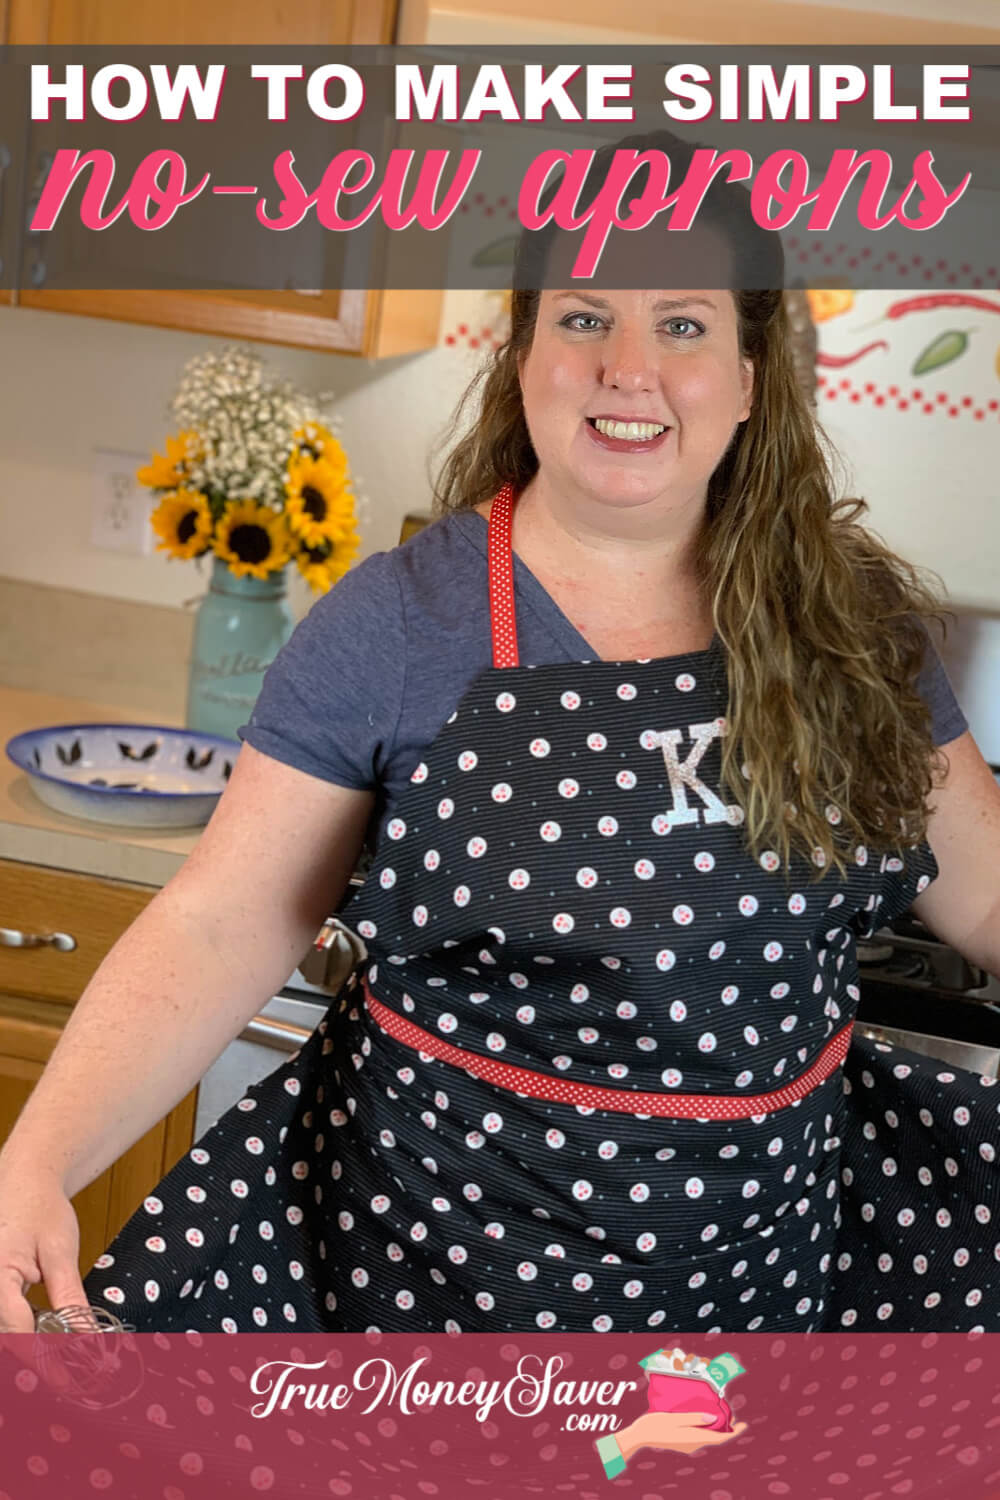 How To Make Simple Aprons Without Sewing